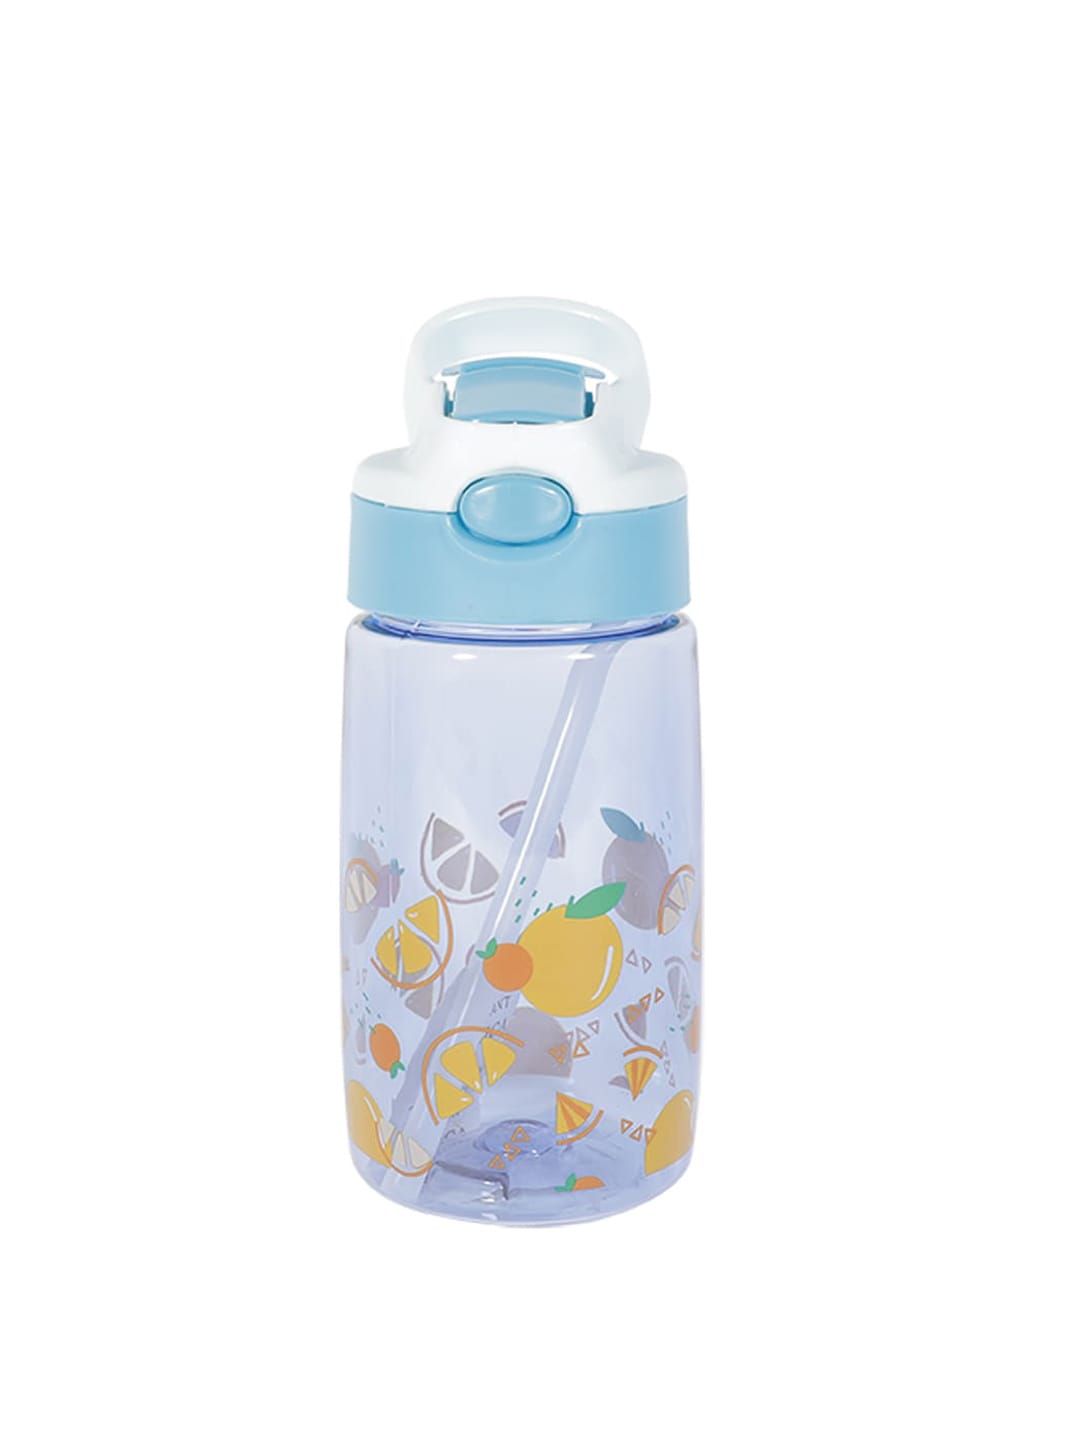 MARKET99 Blue Printed Sipper Water Bottle Price in India